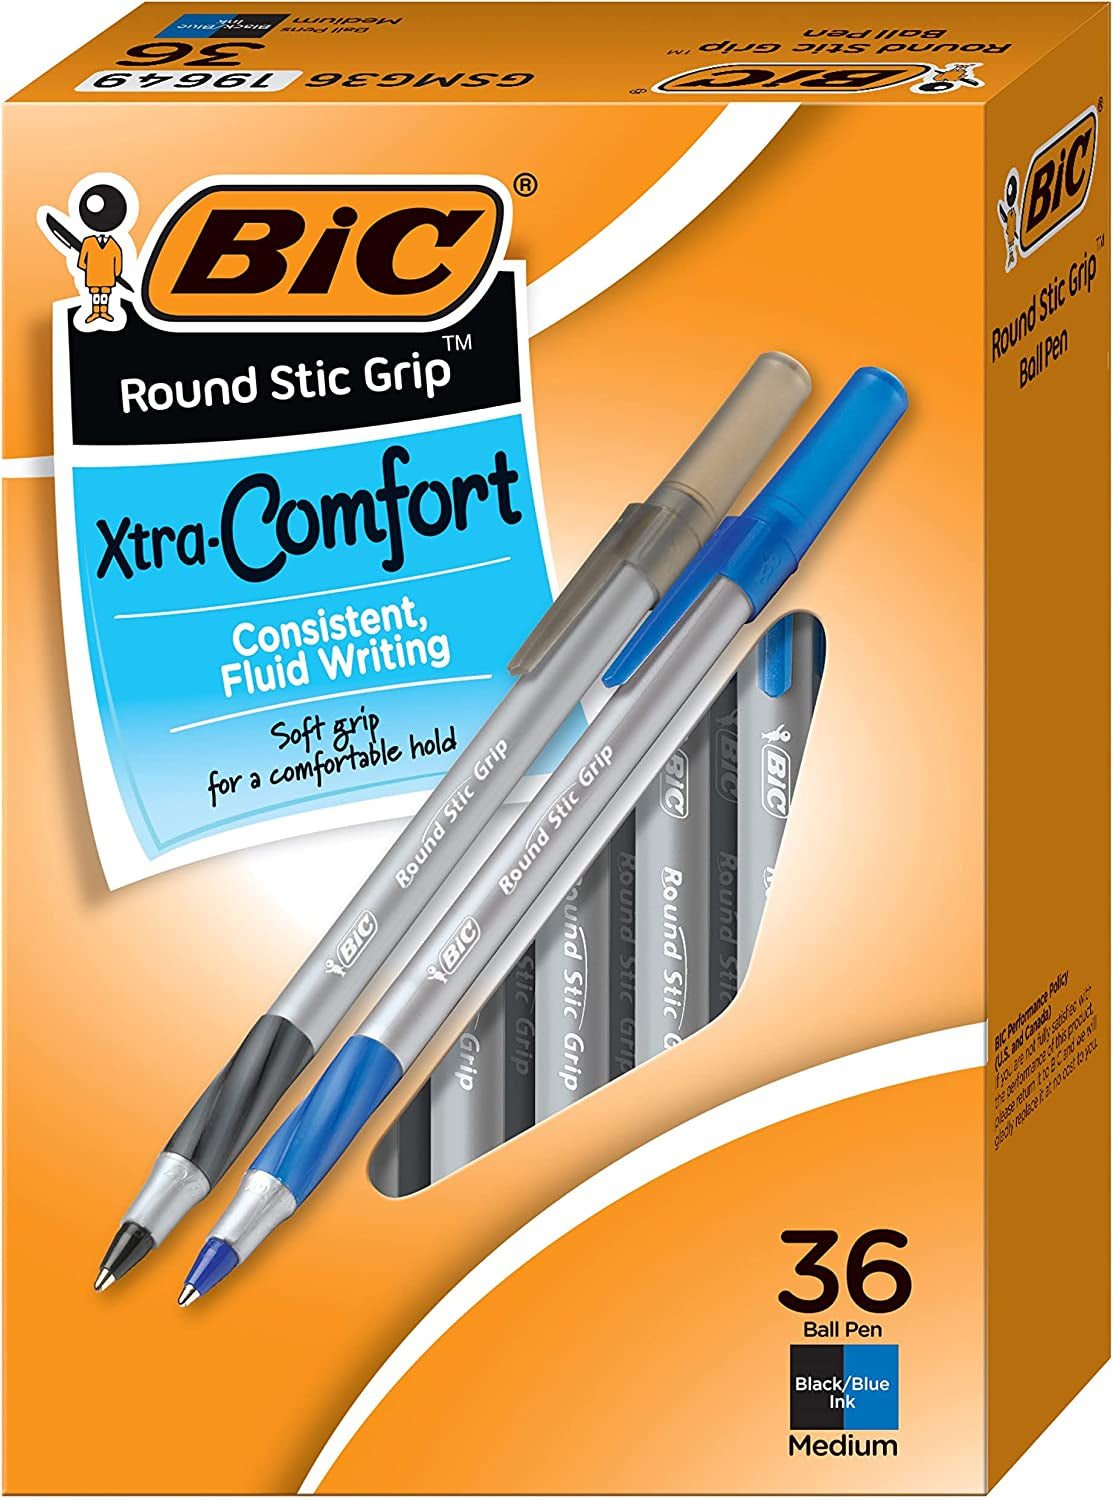 round Stic Grip Xtra Comfort Assorted Colors Ballpoint Pens, Medium Point (1.2Mm), 36-Count Pack, Perfect Writing Pens with Soft Grip for Superb Comfort and Control